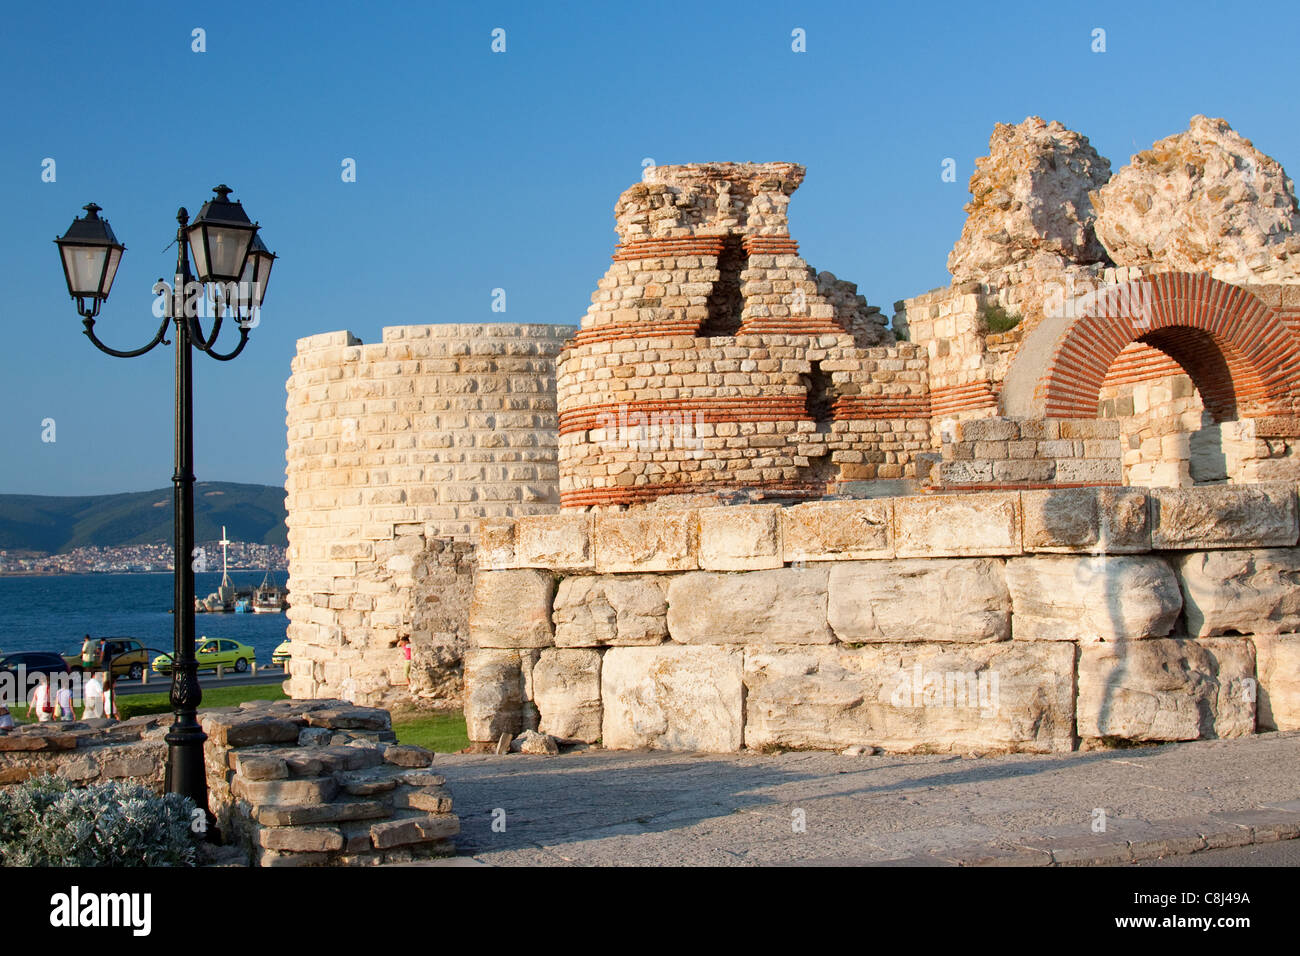 Ancient walls of Nessebar (Ruins of fortress walls Old Town Nessebur) Stock Photo